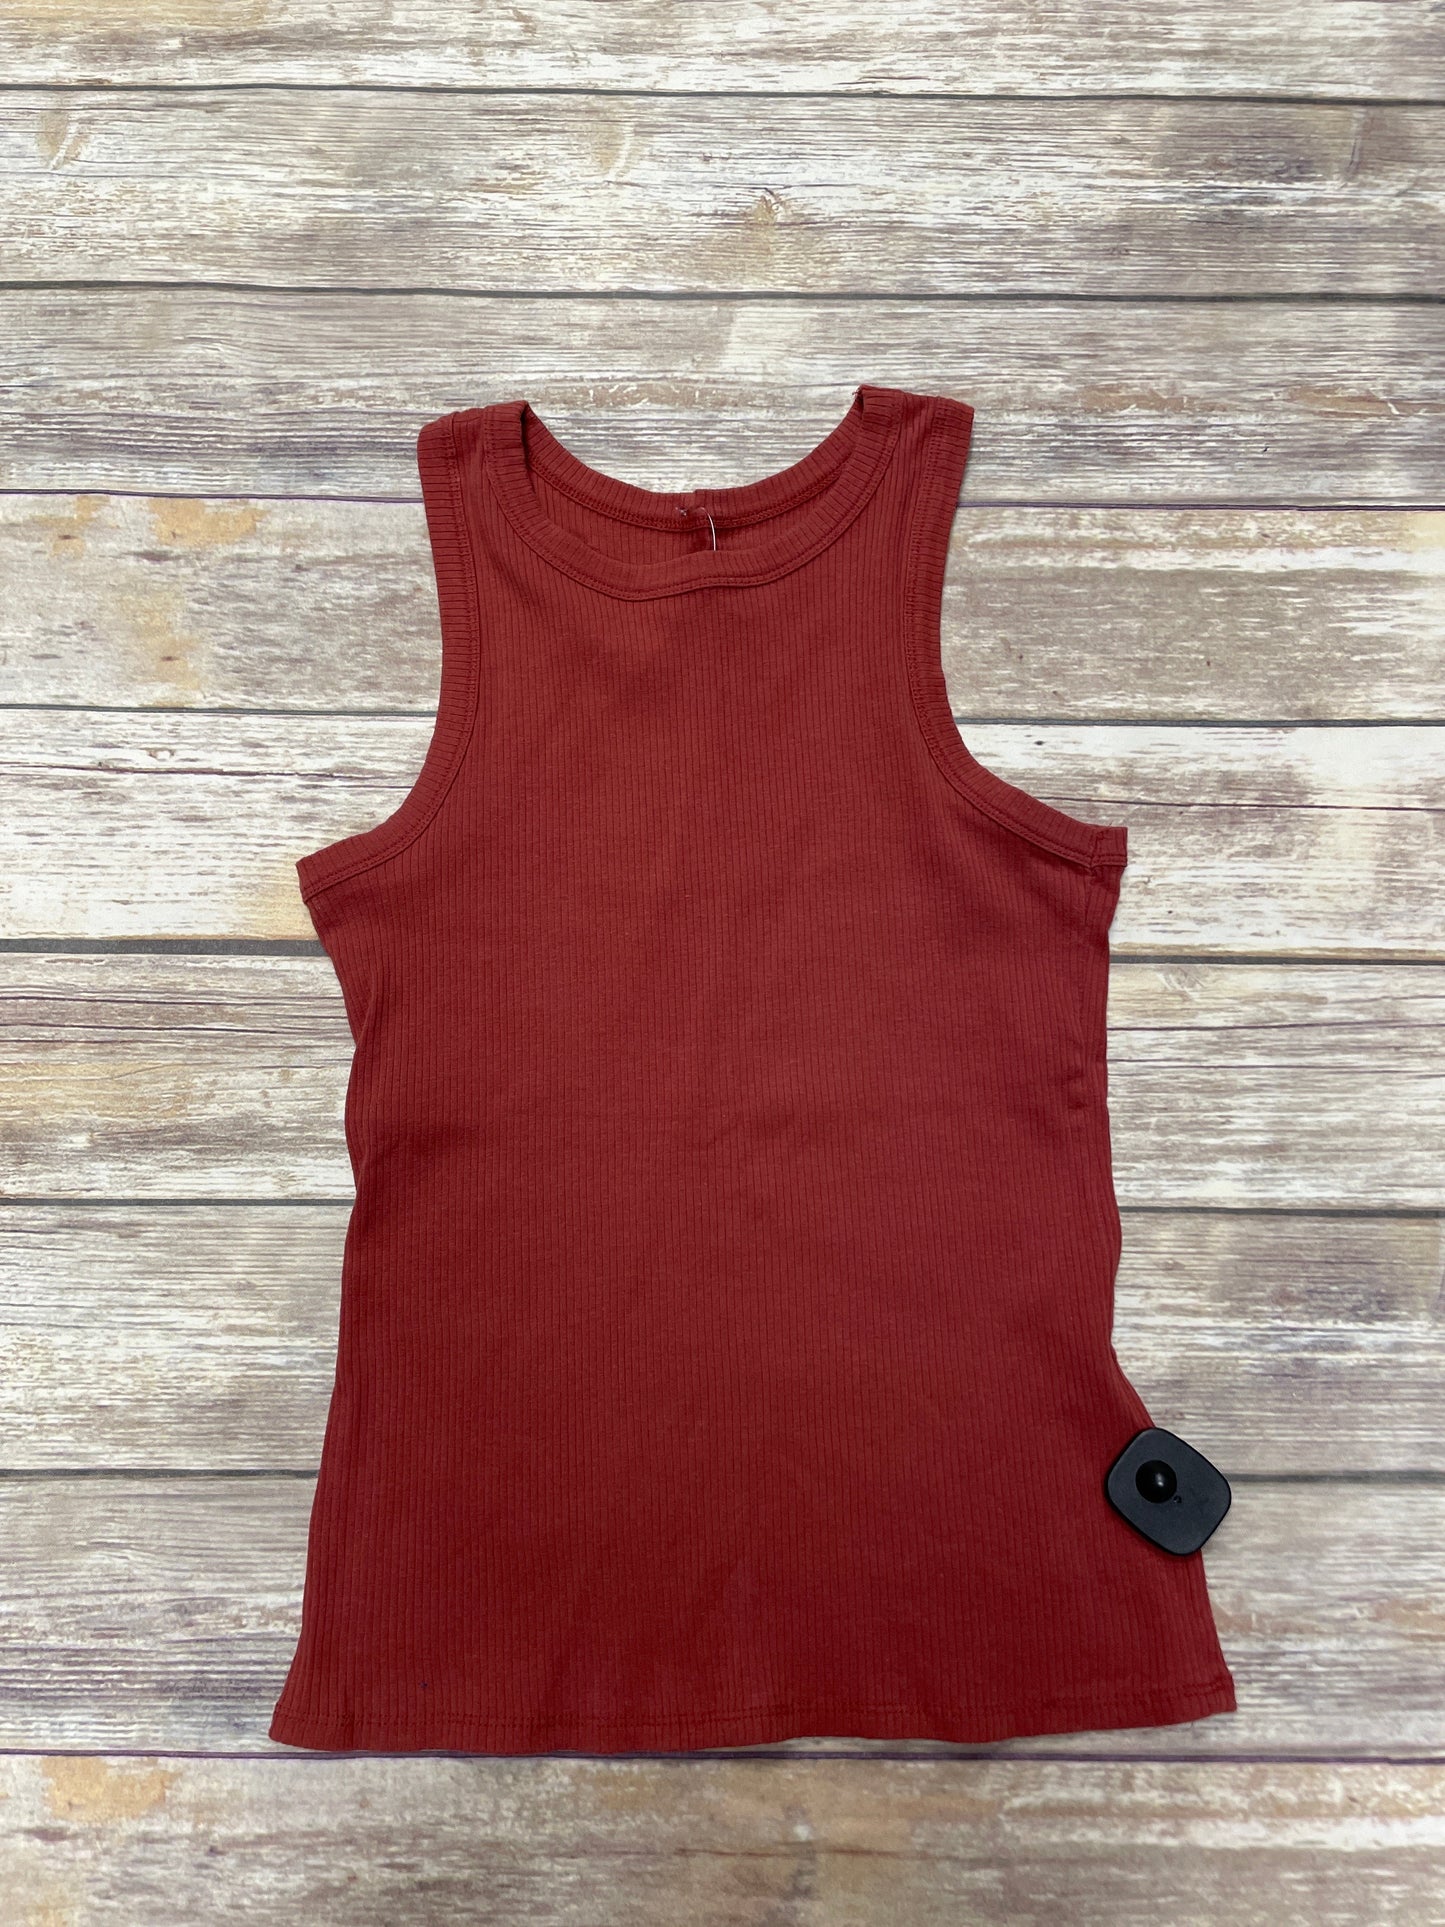 Brown Tank Top Maurices, Size L